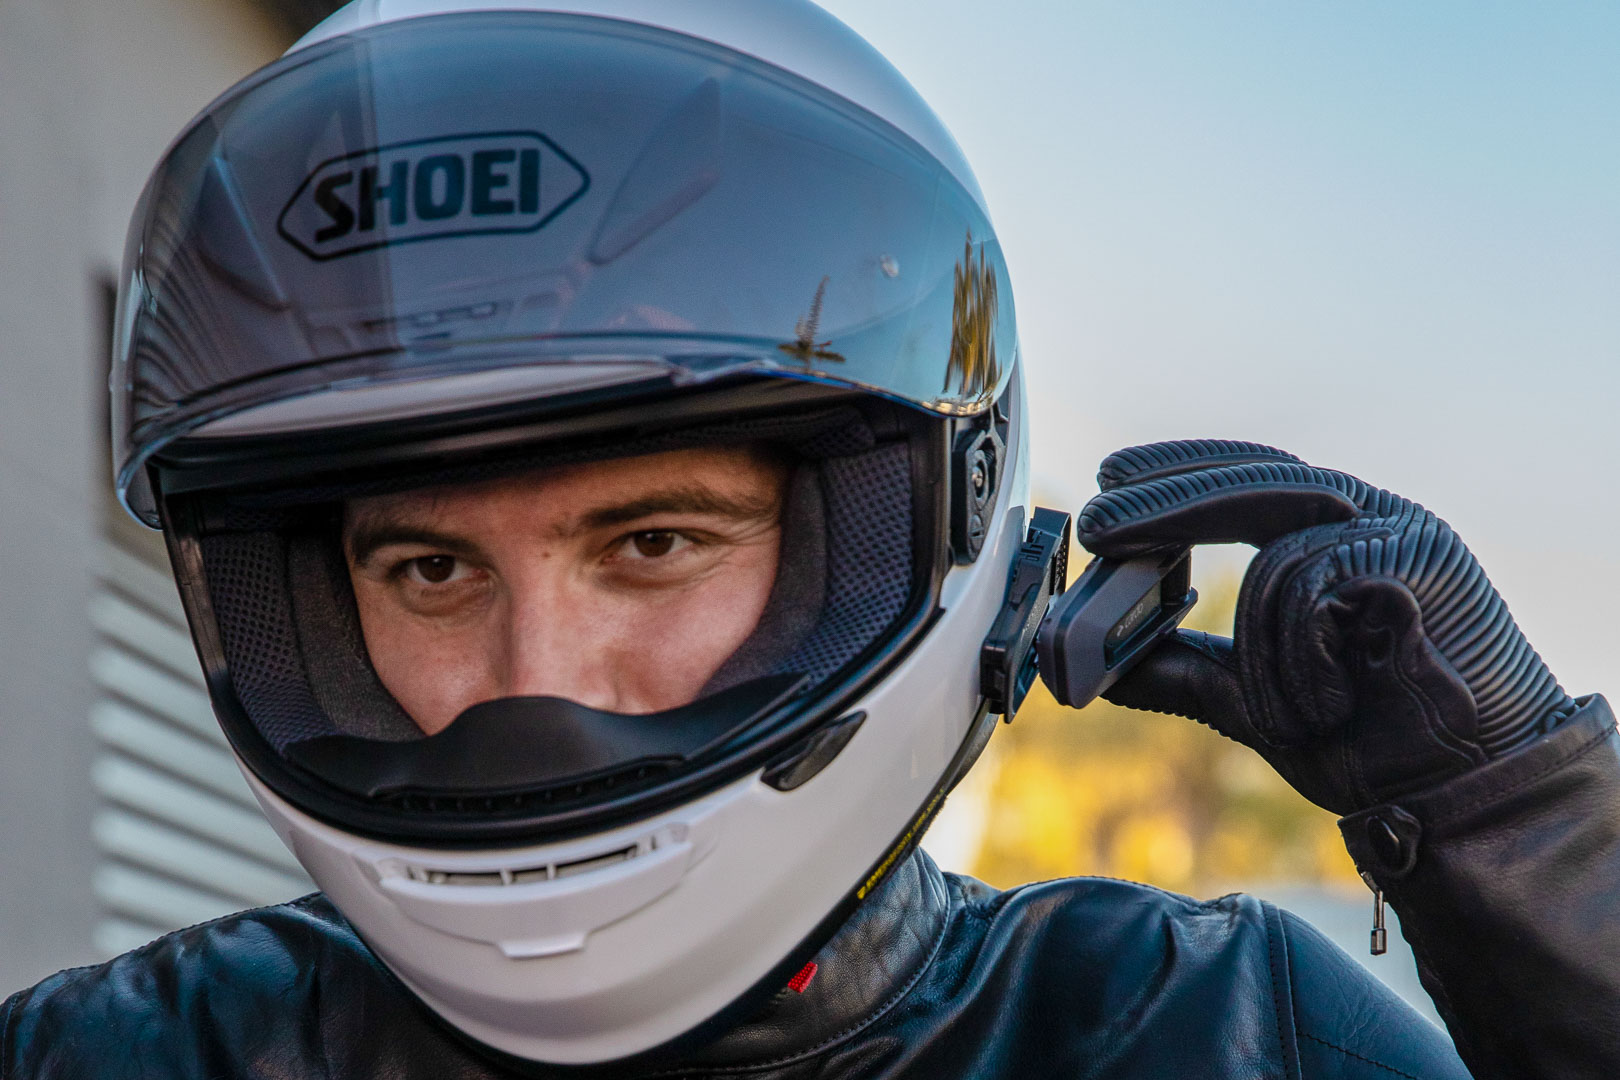 https://www.overlanders.ie/wp-content/uploads/2022/04/cardo-packtalk-edge-first-look-motorcycle-communications-intercome-devices-mesh-bluetooth-2.jpg